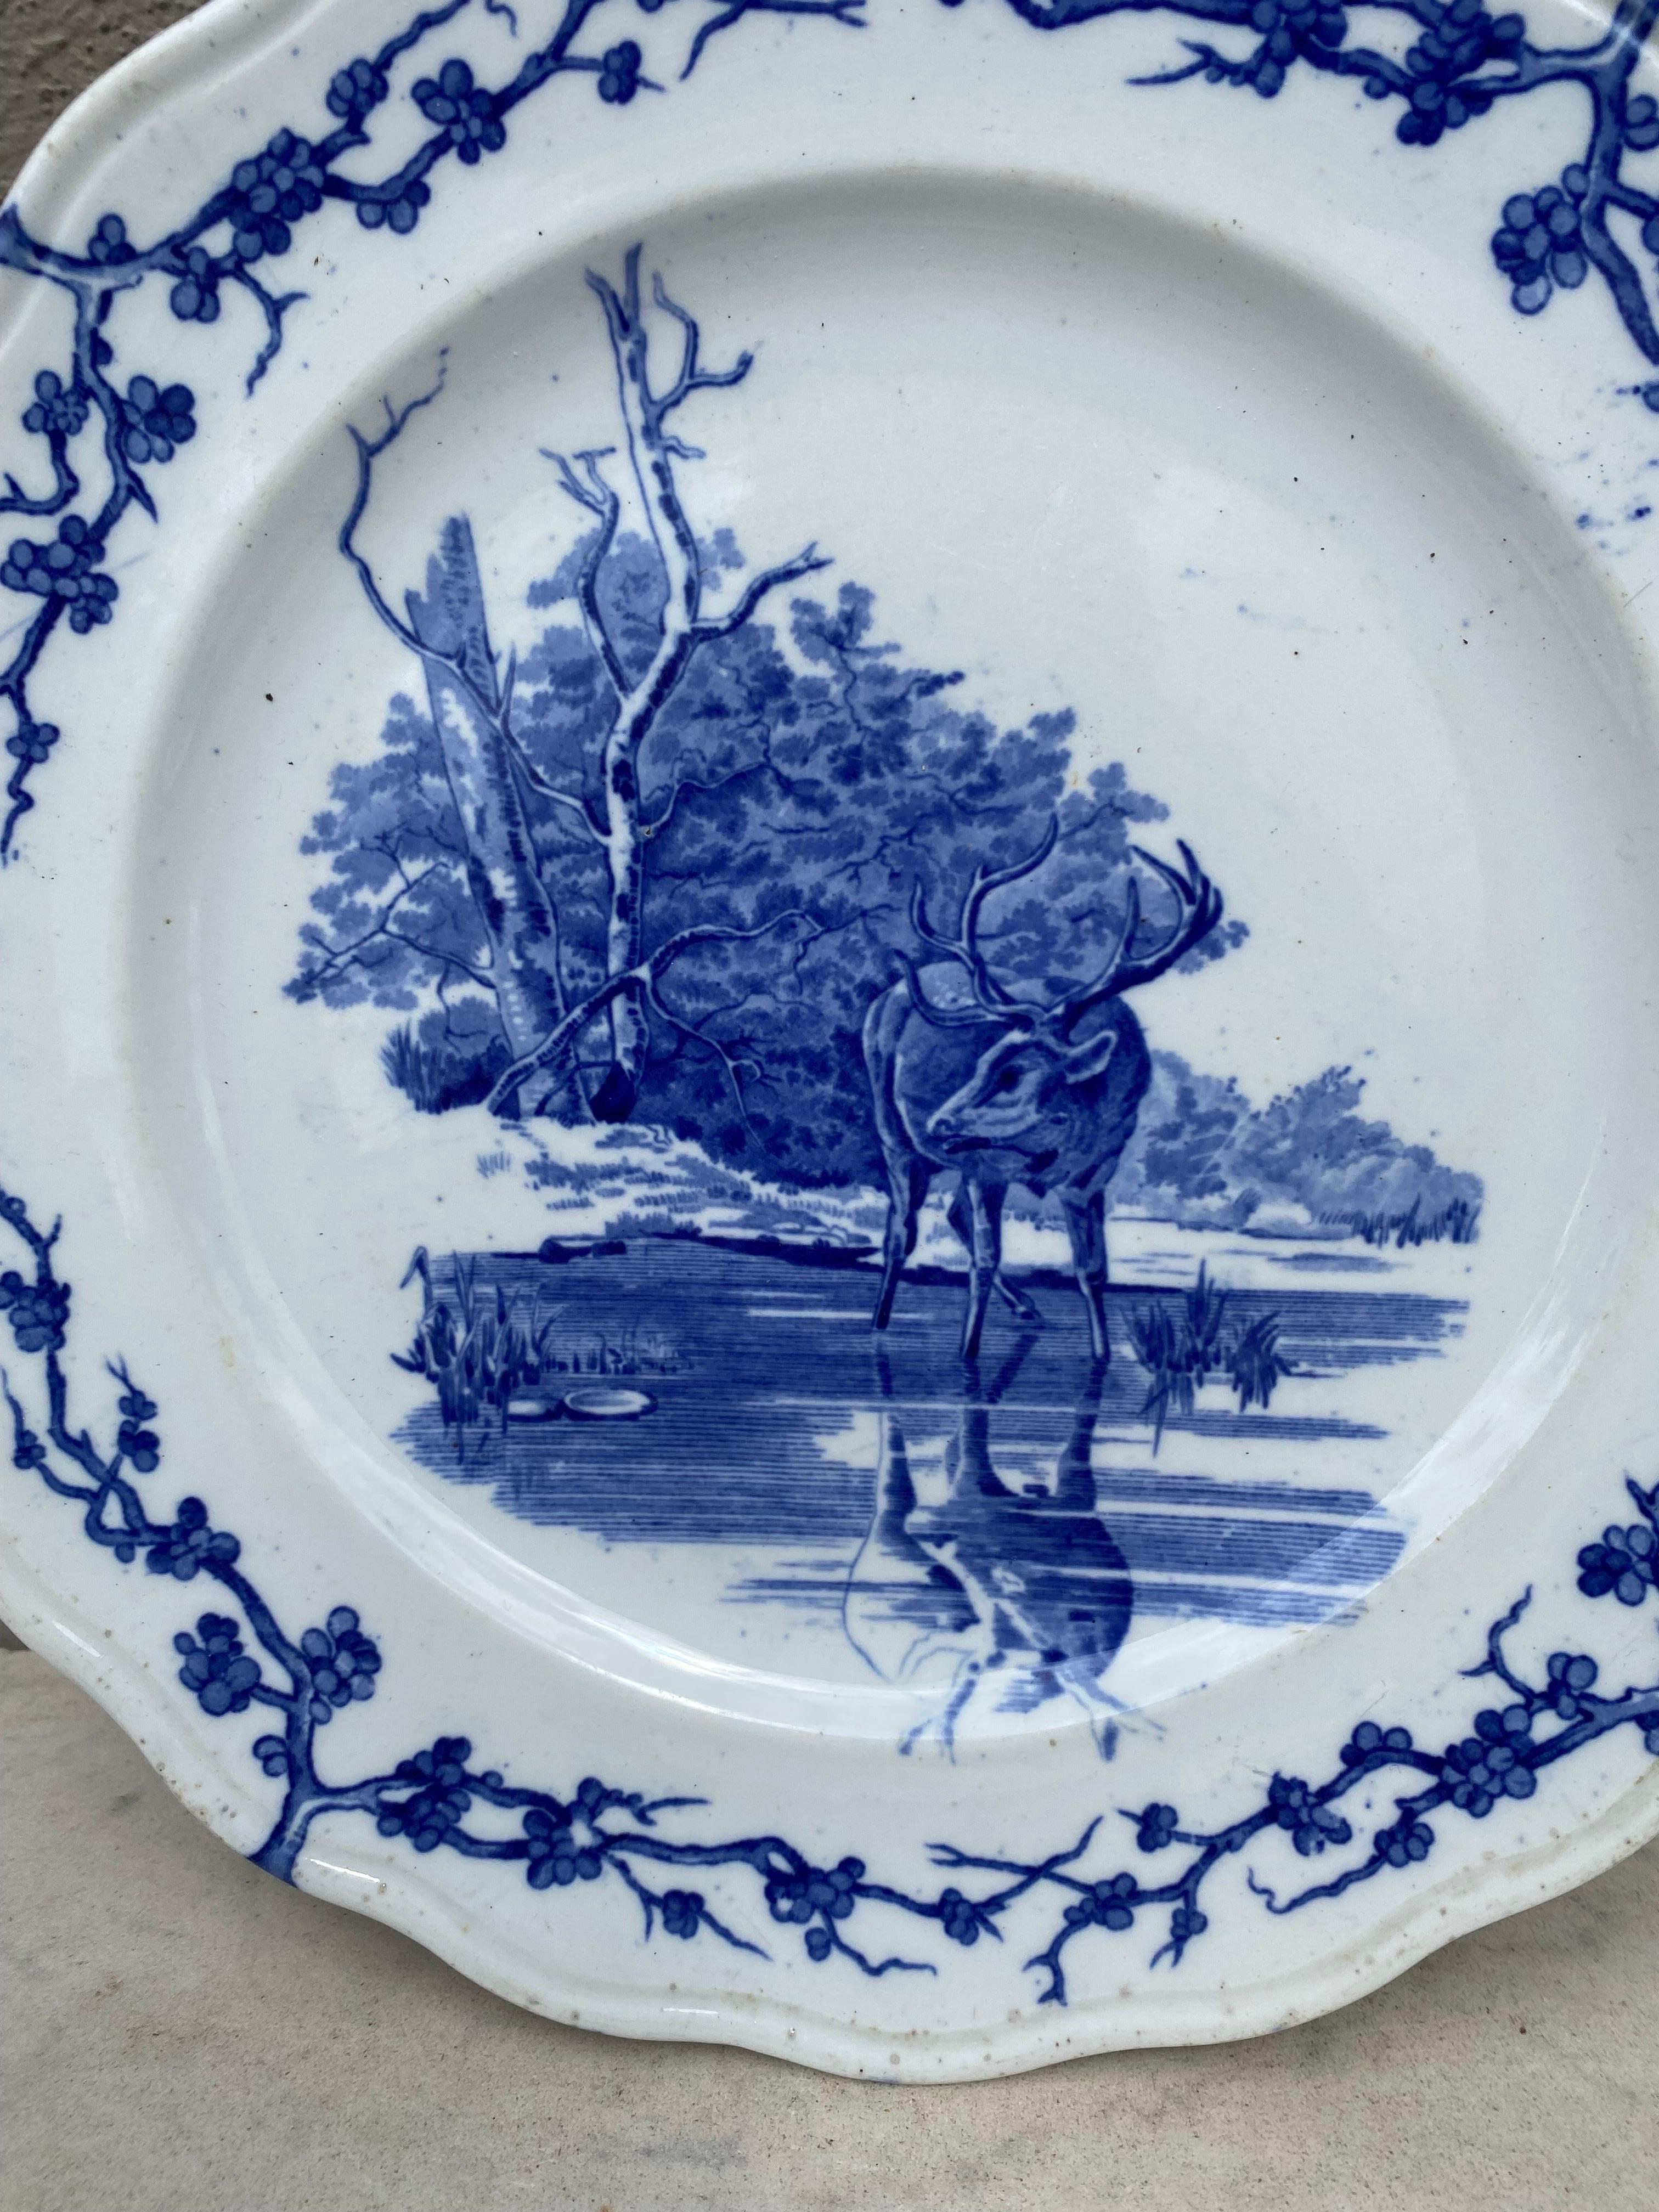 English blue & white plate Stag Brown Westhead and Moore, circa 1890.
Was sold in the Grand Depot 21 rue Drouot Paris.
Fontaine / Aesops Fables
English Losange mark.